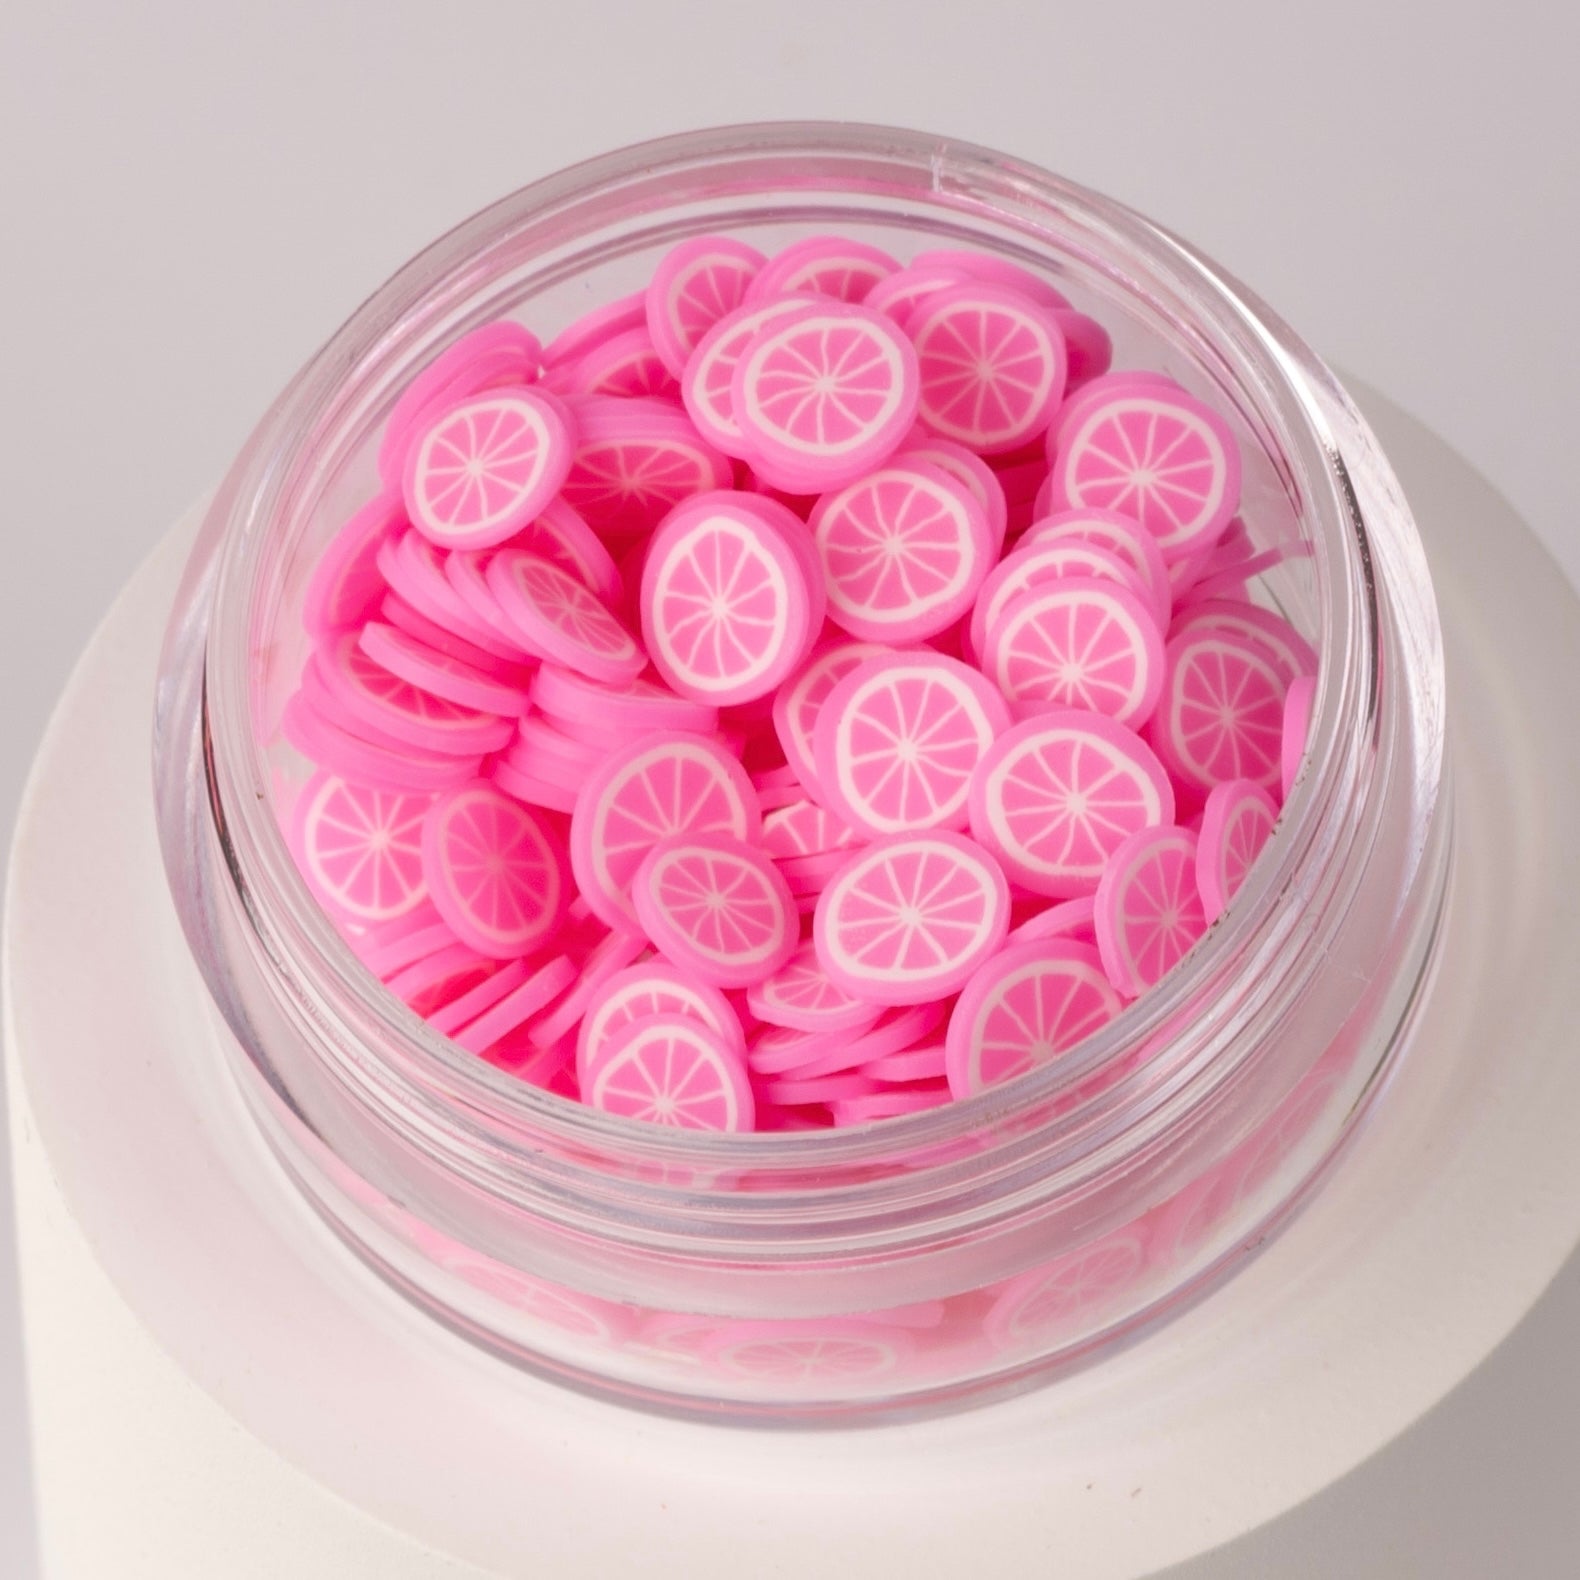 Mini pink lemon slices in clear jar on white background.